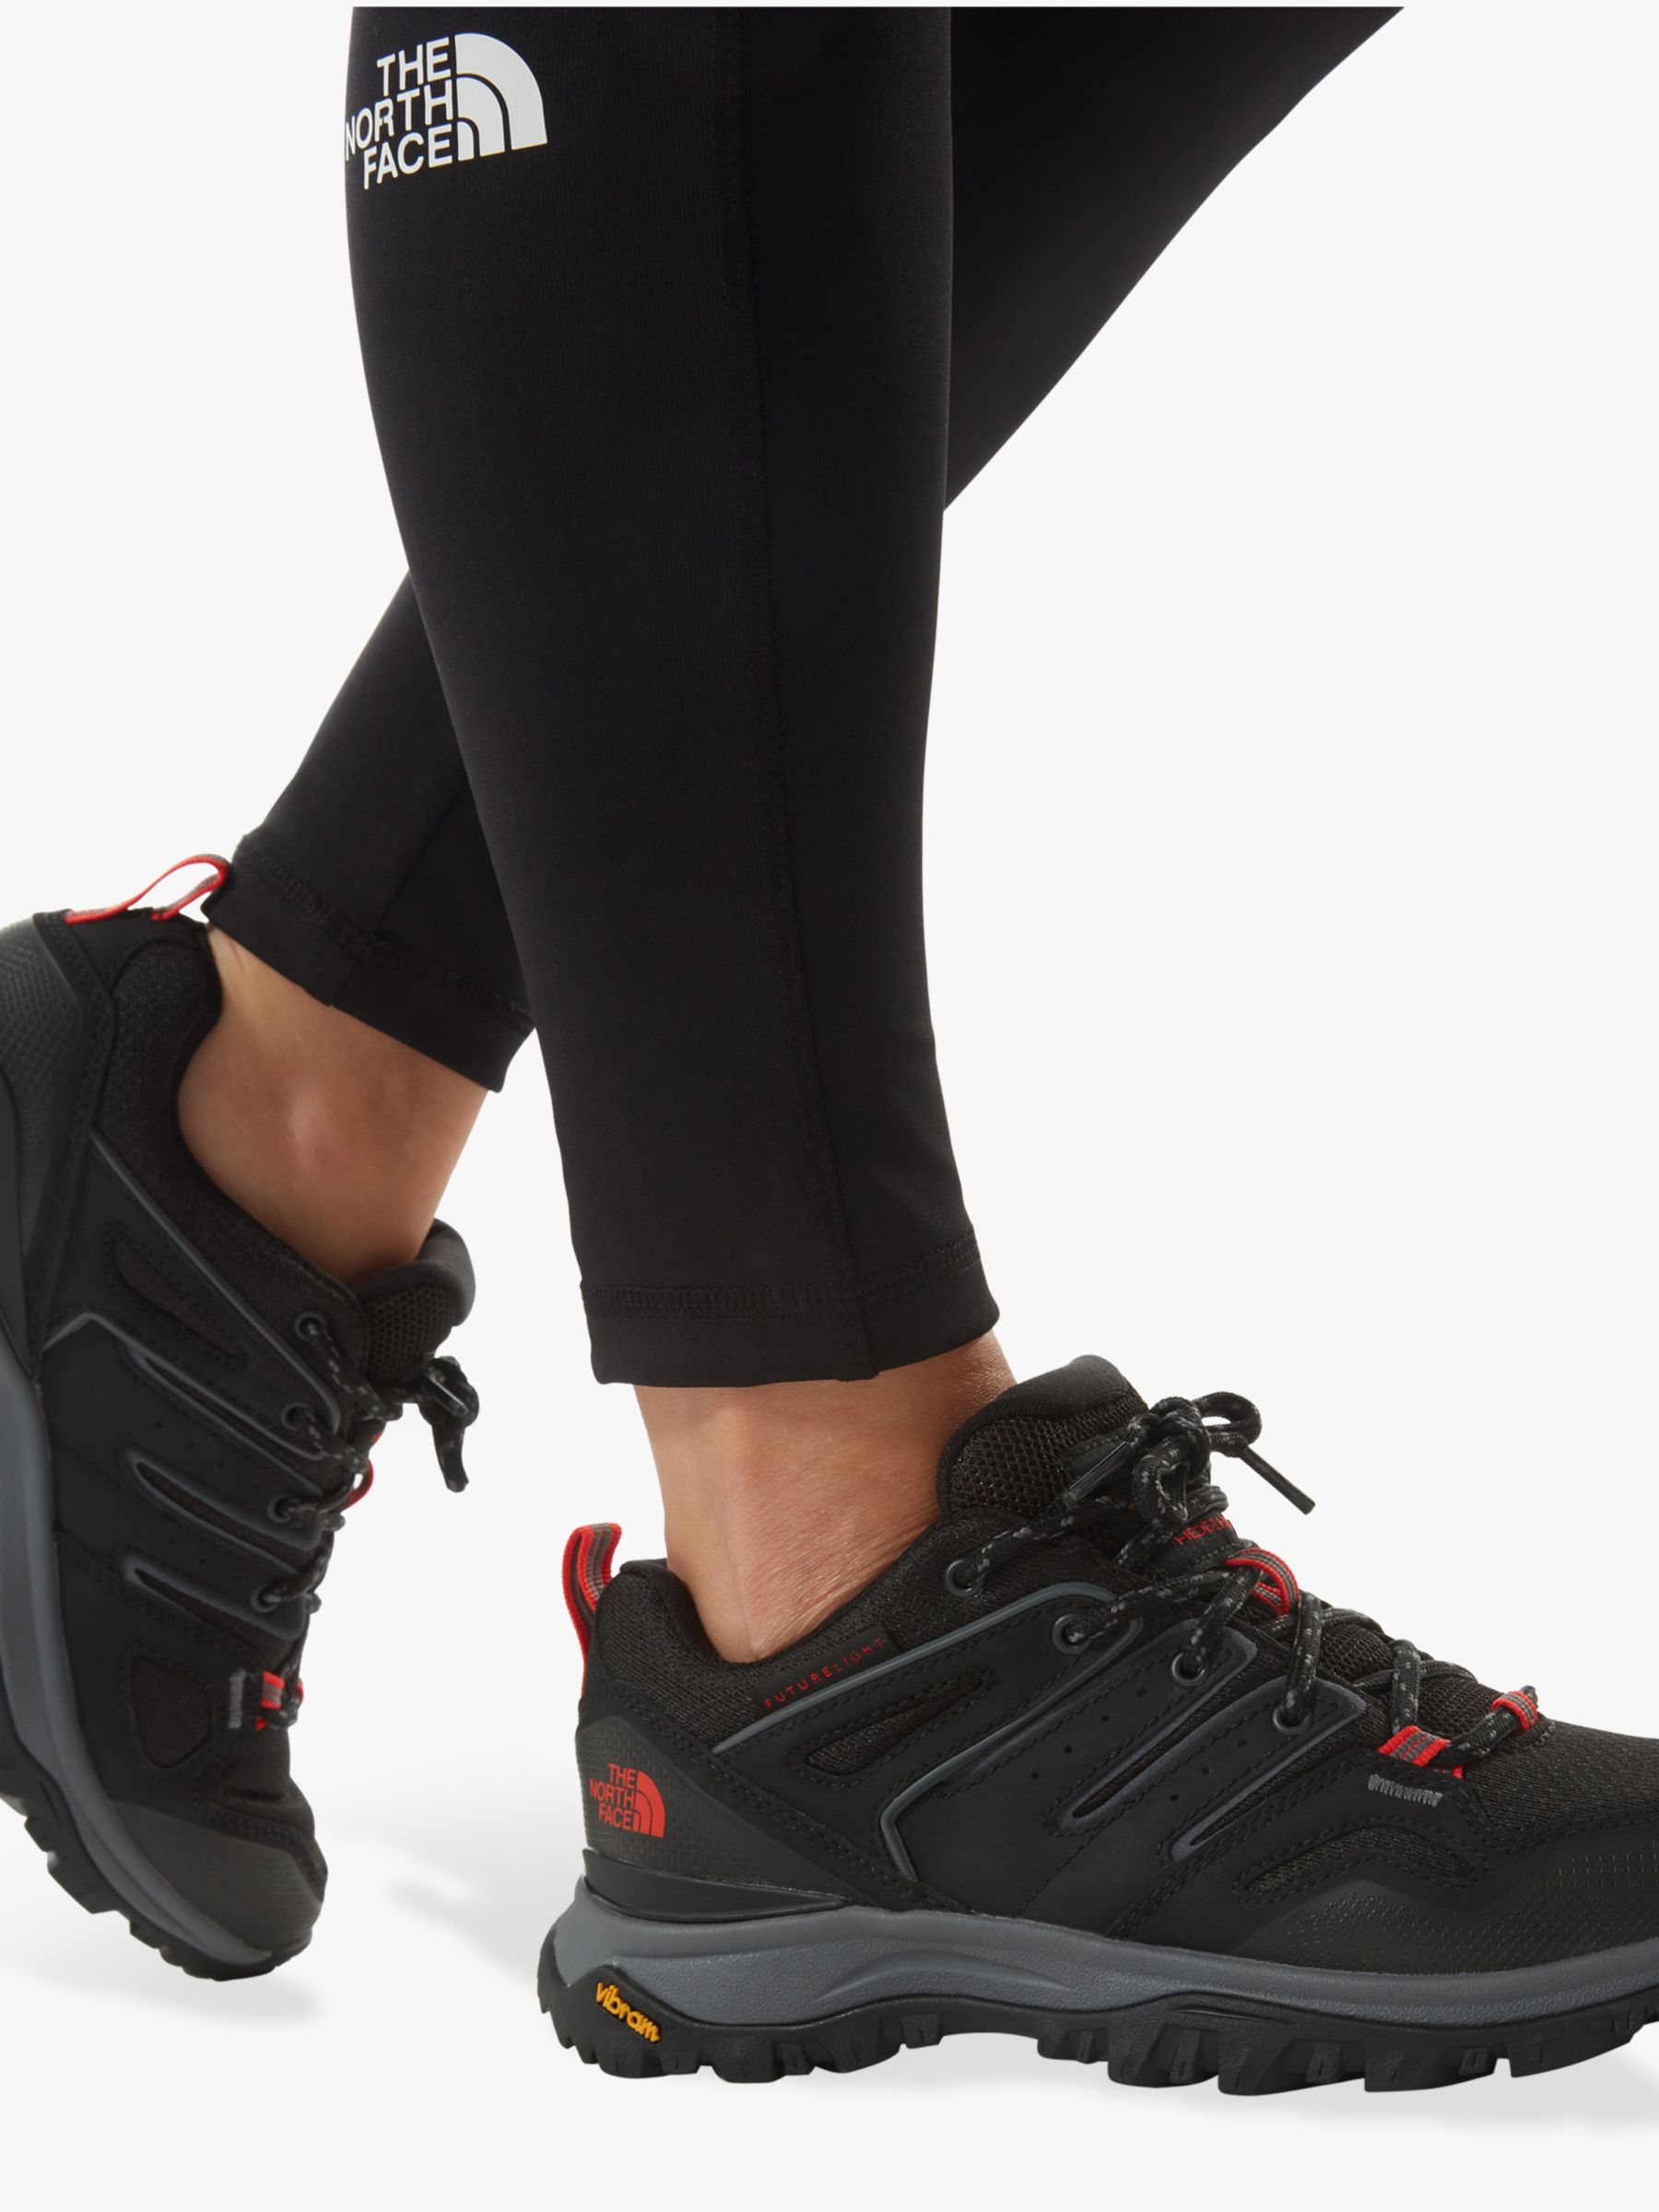 The North Face Hedgehog FUTURELIGHT™ Women's Waterproof Hiking Shoes, TNF  Black/Horizon Red at John Lewis & Partners